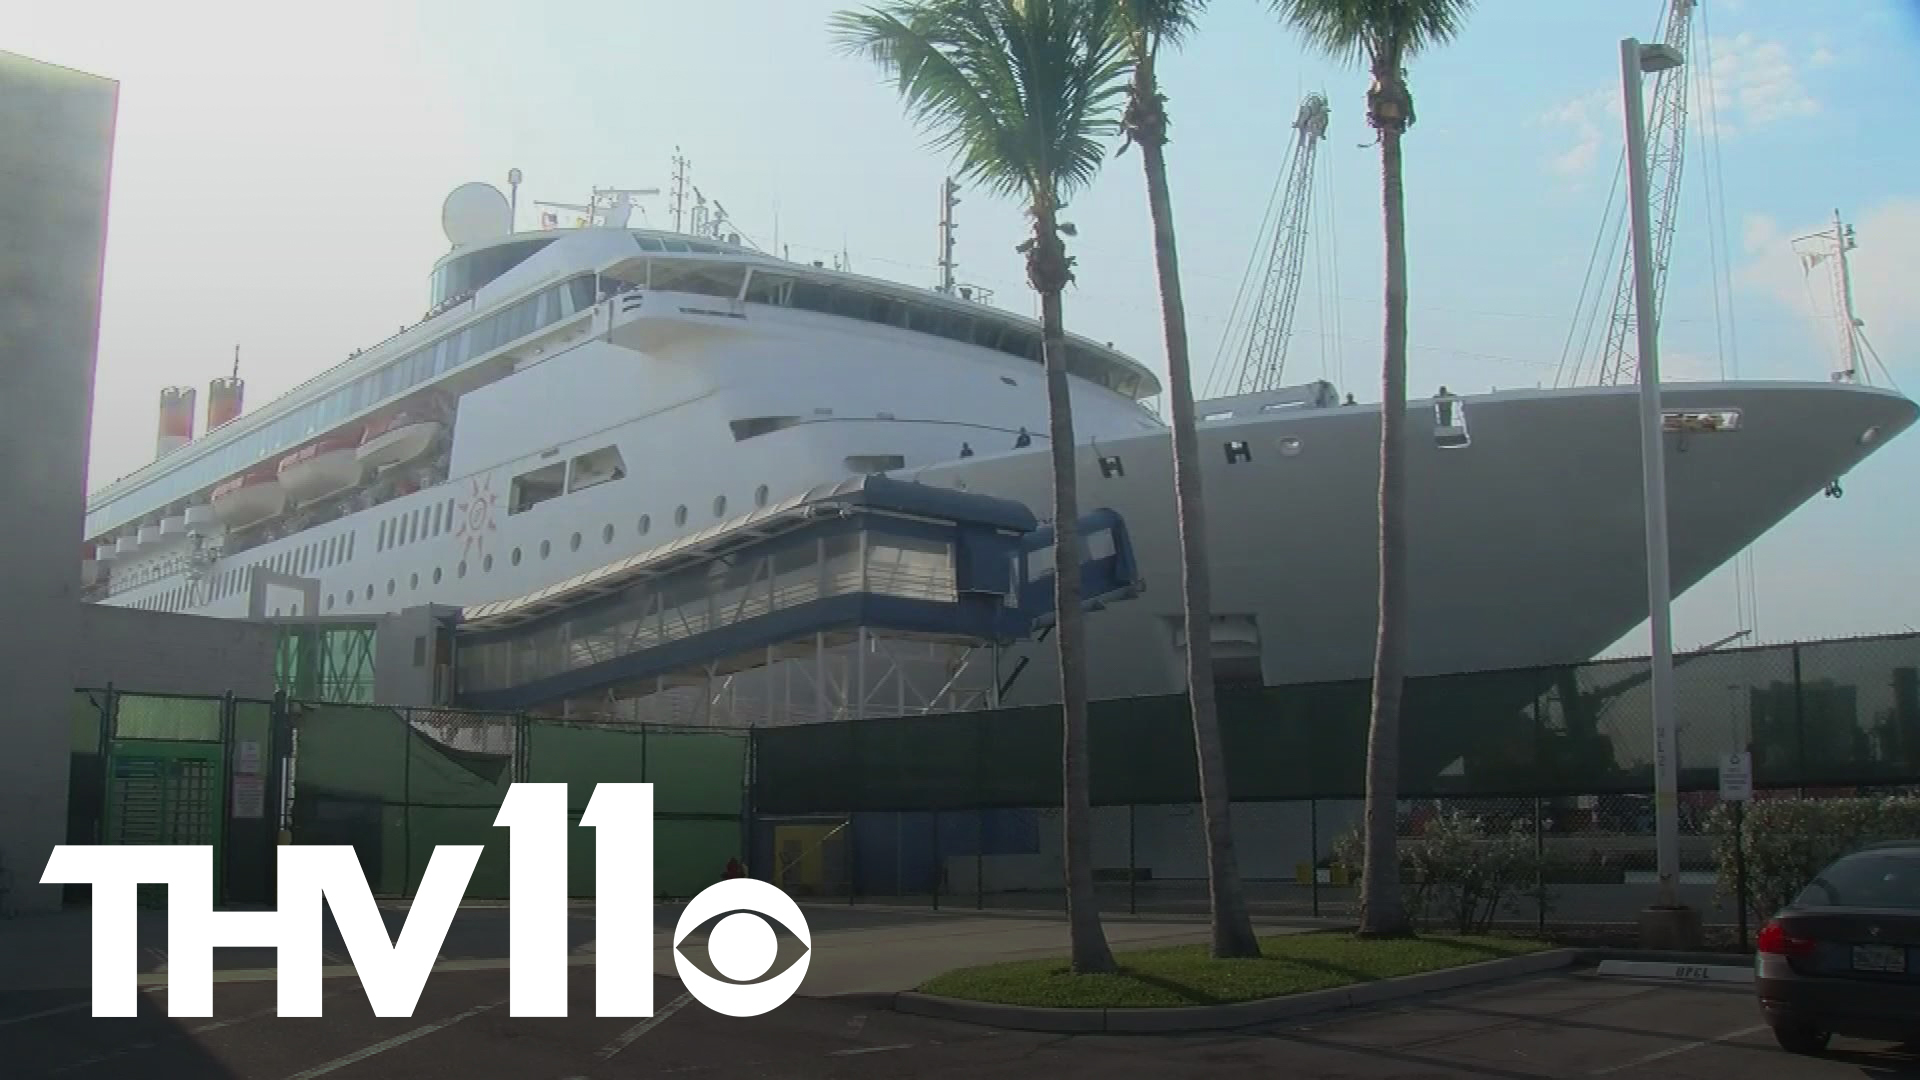 Cruise lines will be able to resume operations as early as this summer if they're able to prove that 98% of staff and 95% of passengers are vaccinated.